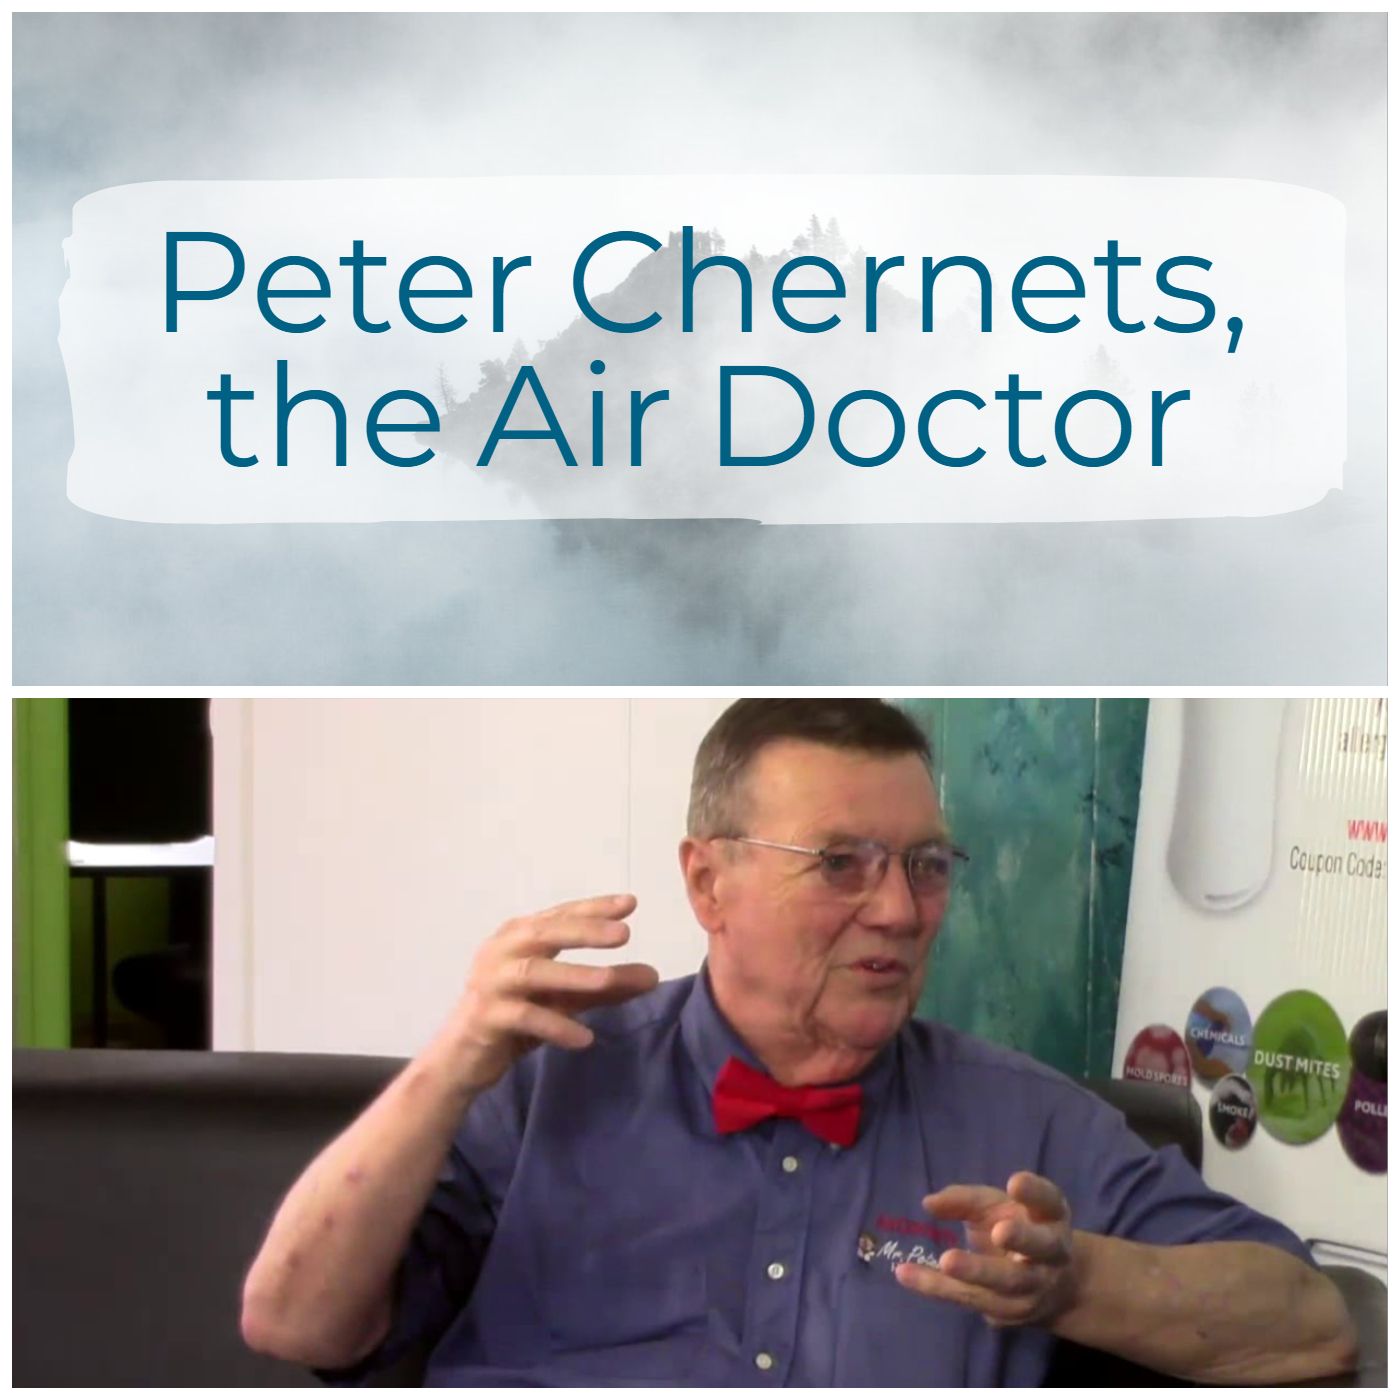 Purifying the Air with Peter Chernets, the Air Doctor from AirDoctor.tv